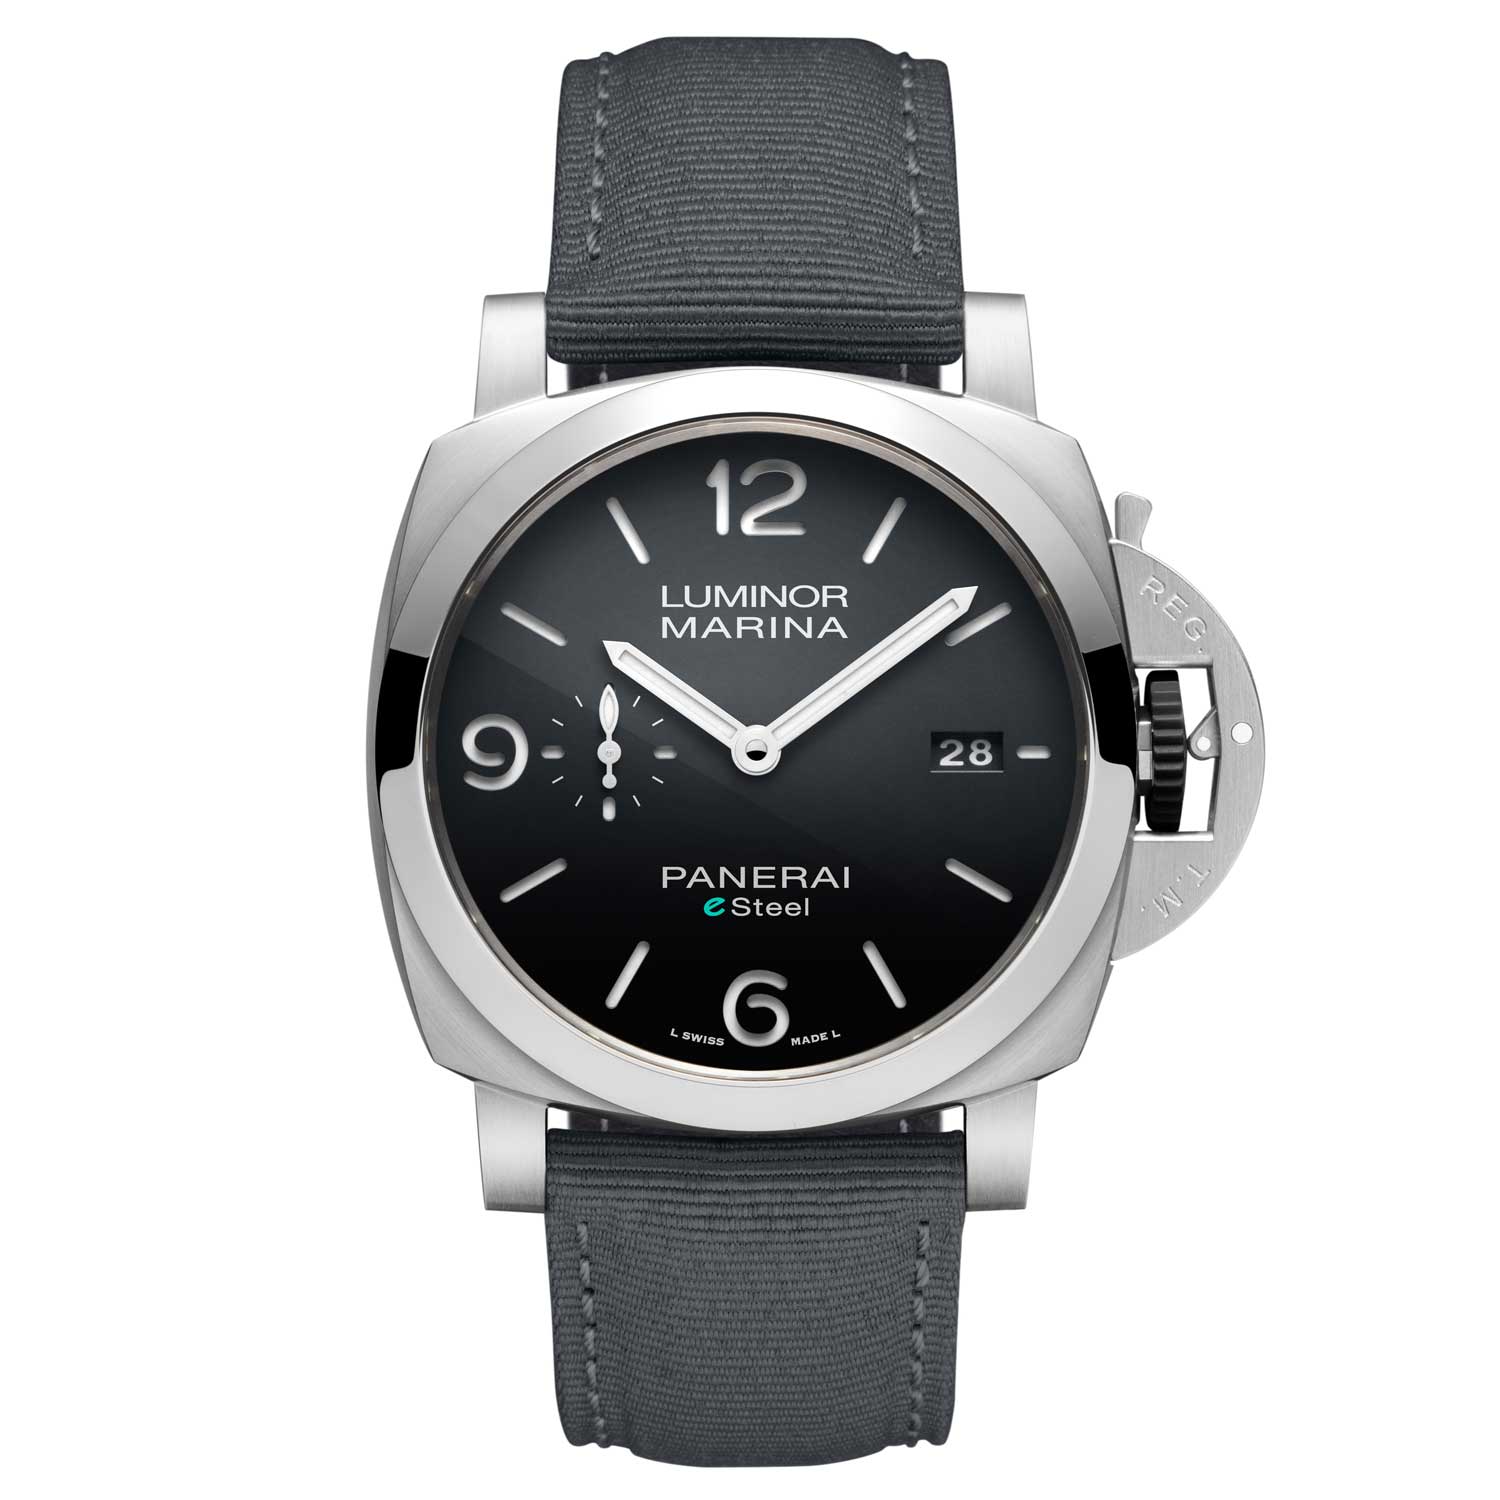 The watch is available in three colors: blue, gray and green — the last being reserved for Panerai’s boutiques and ecommerce.